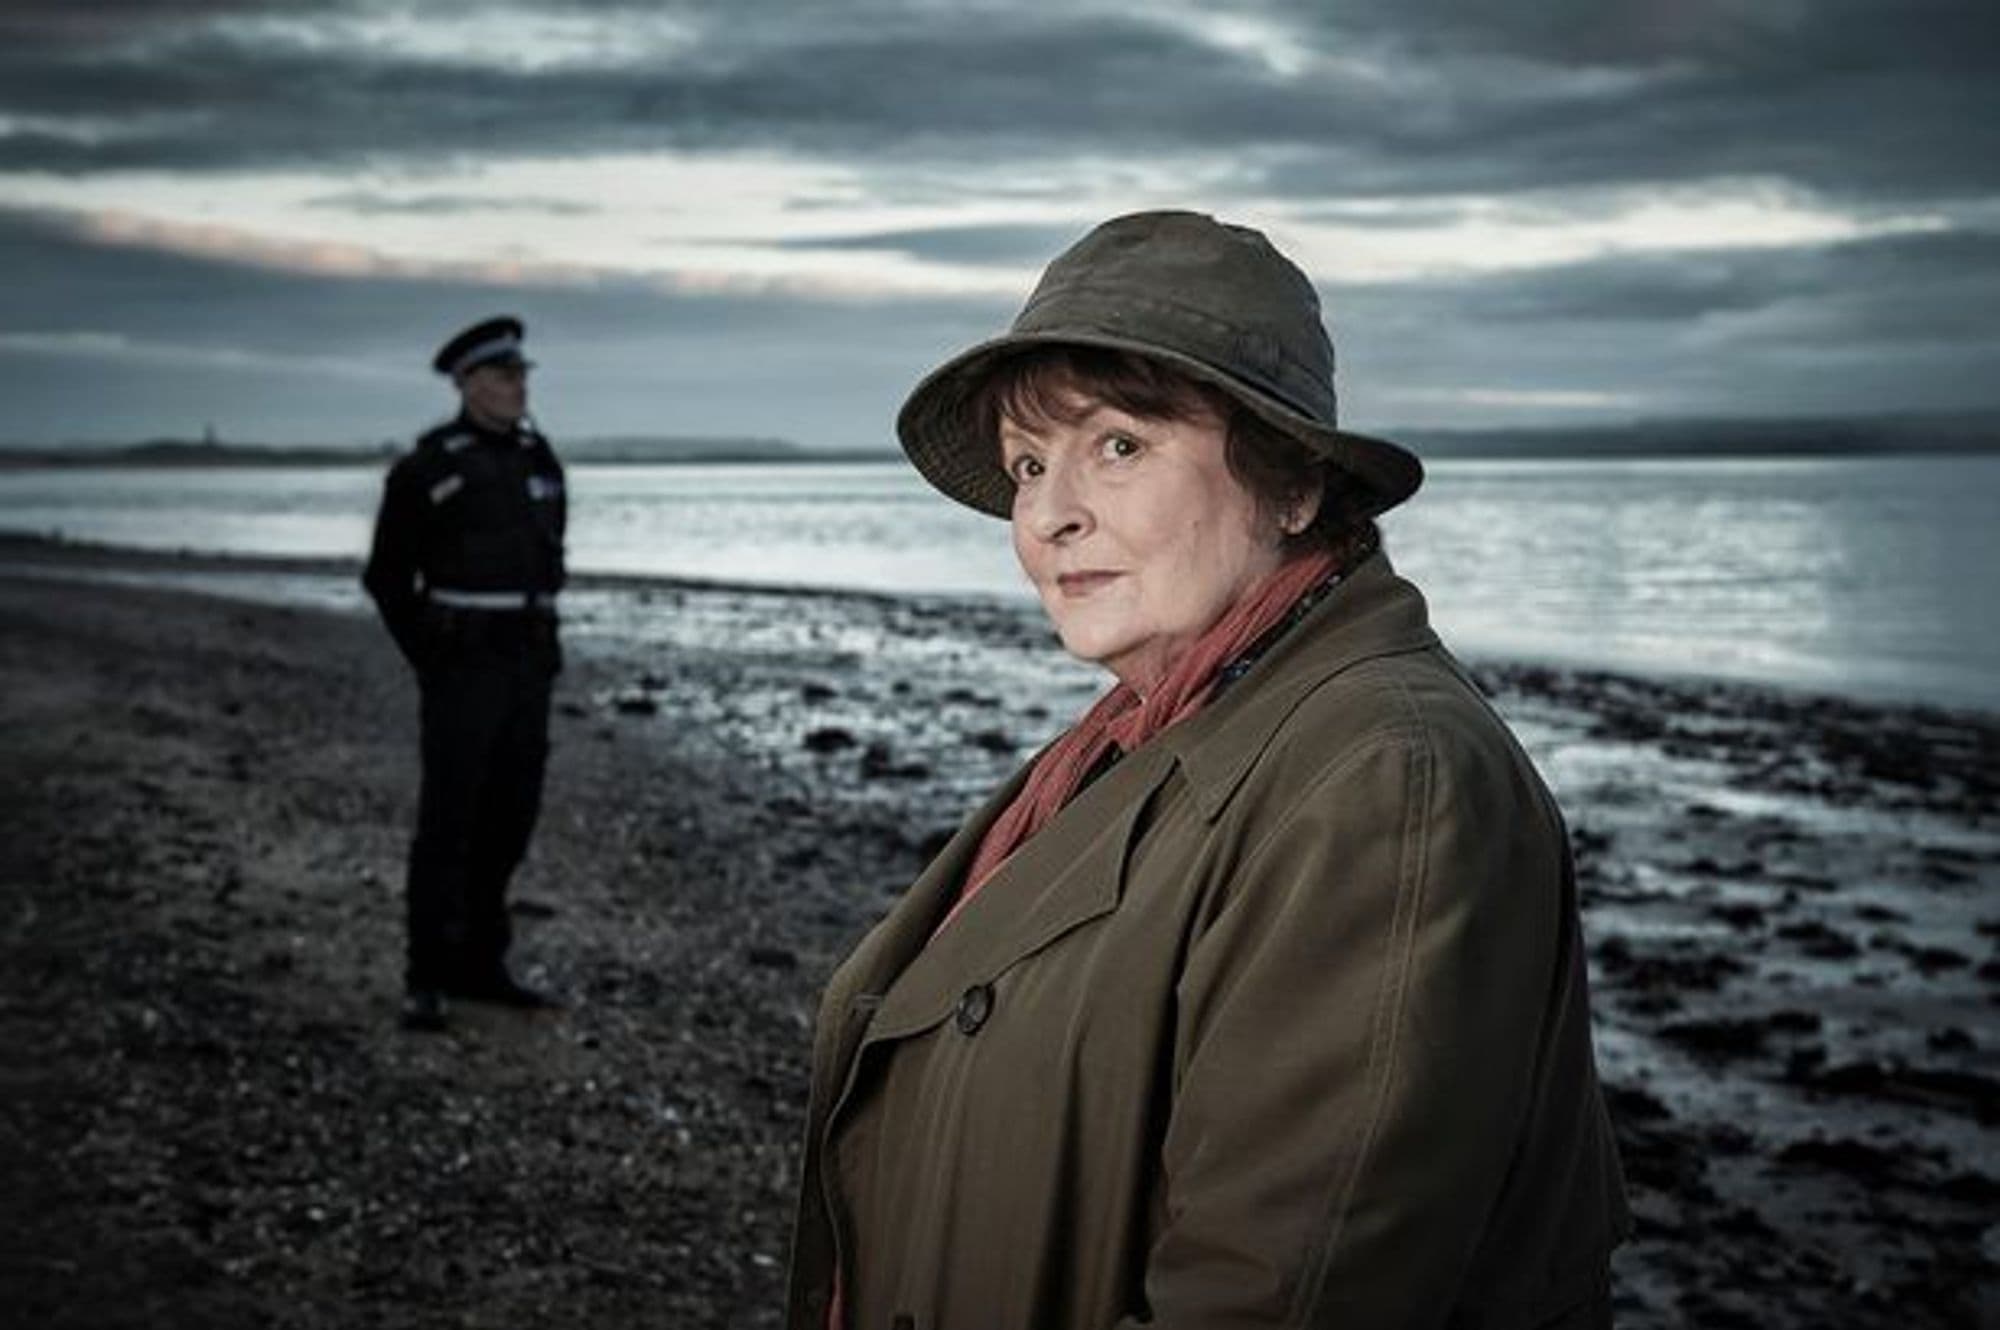 # Brenda Blethyn to Depart from ITV's Crime Drama "Vera" After 13 Years